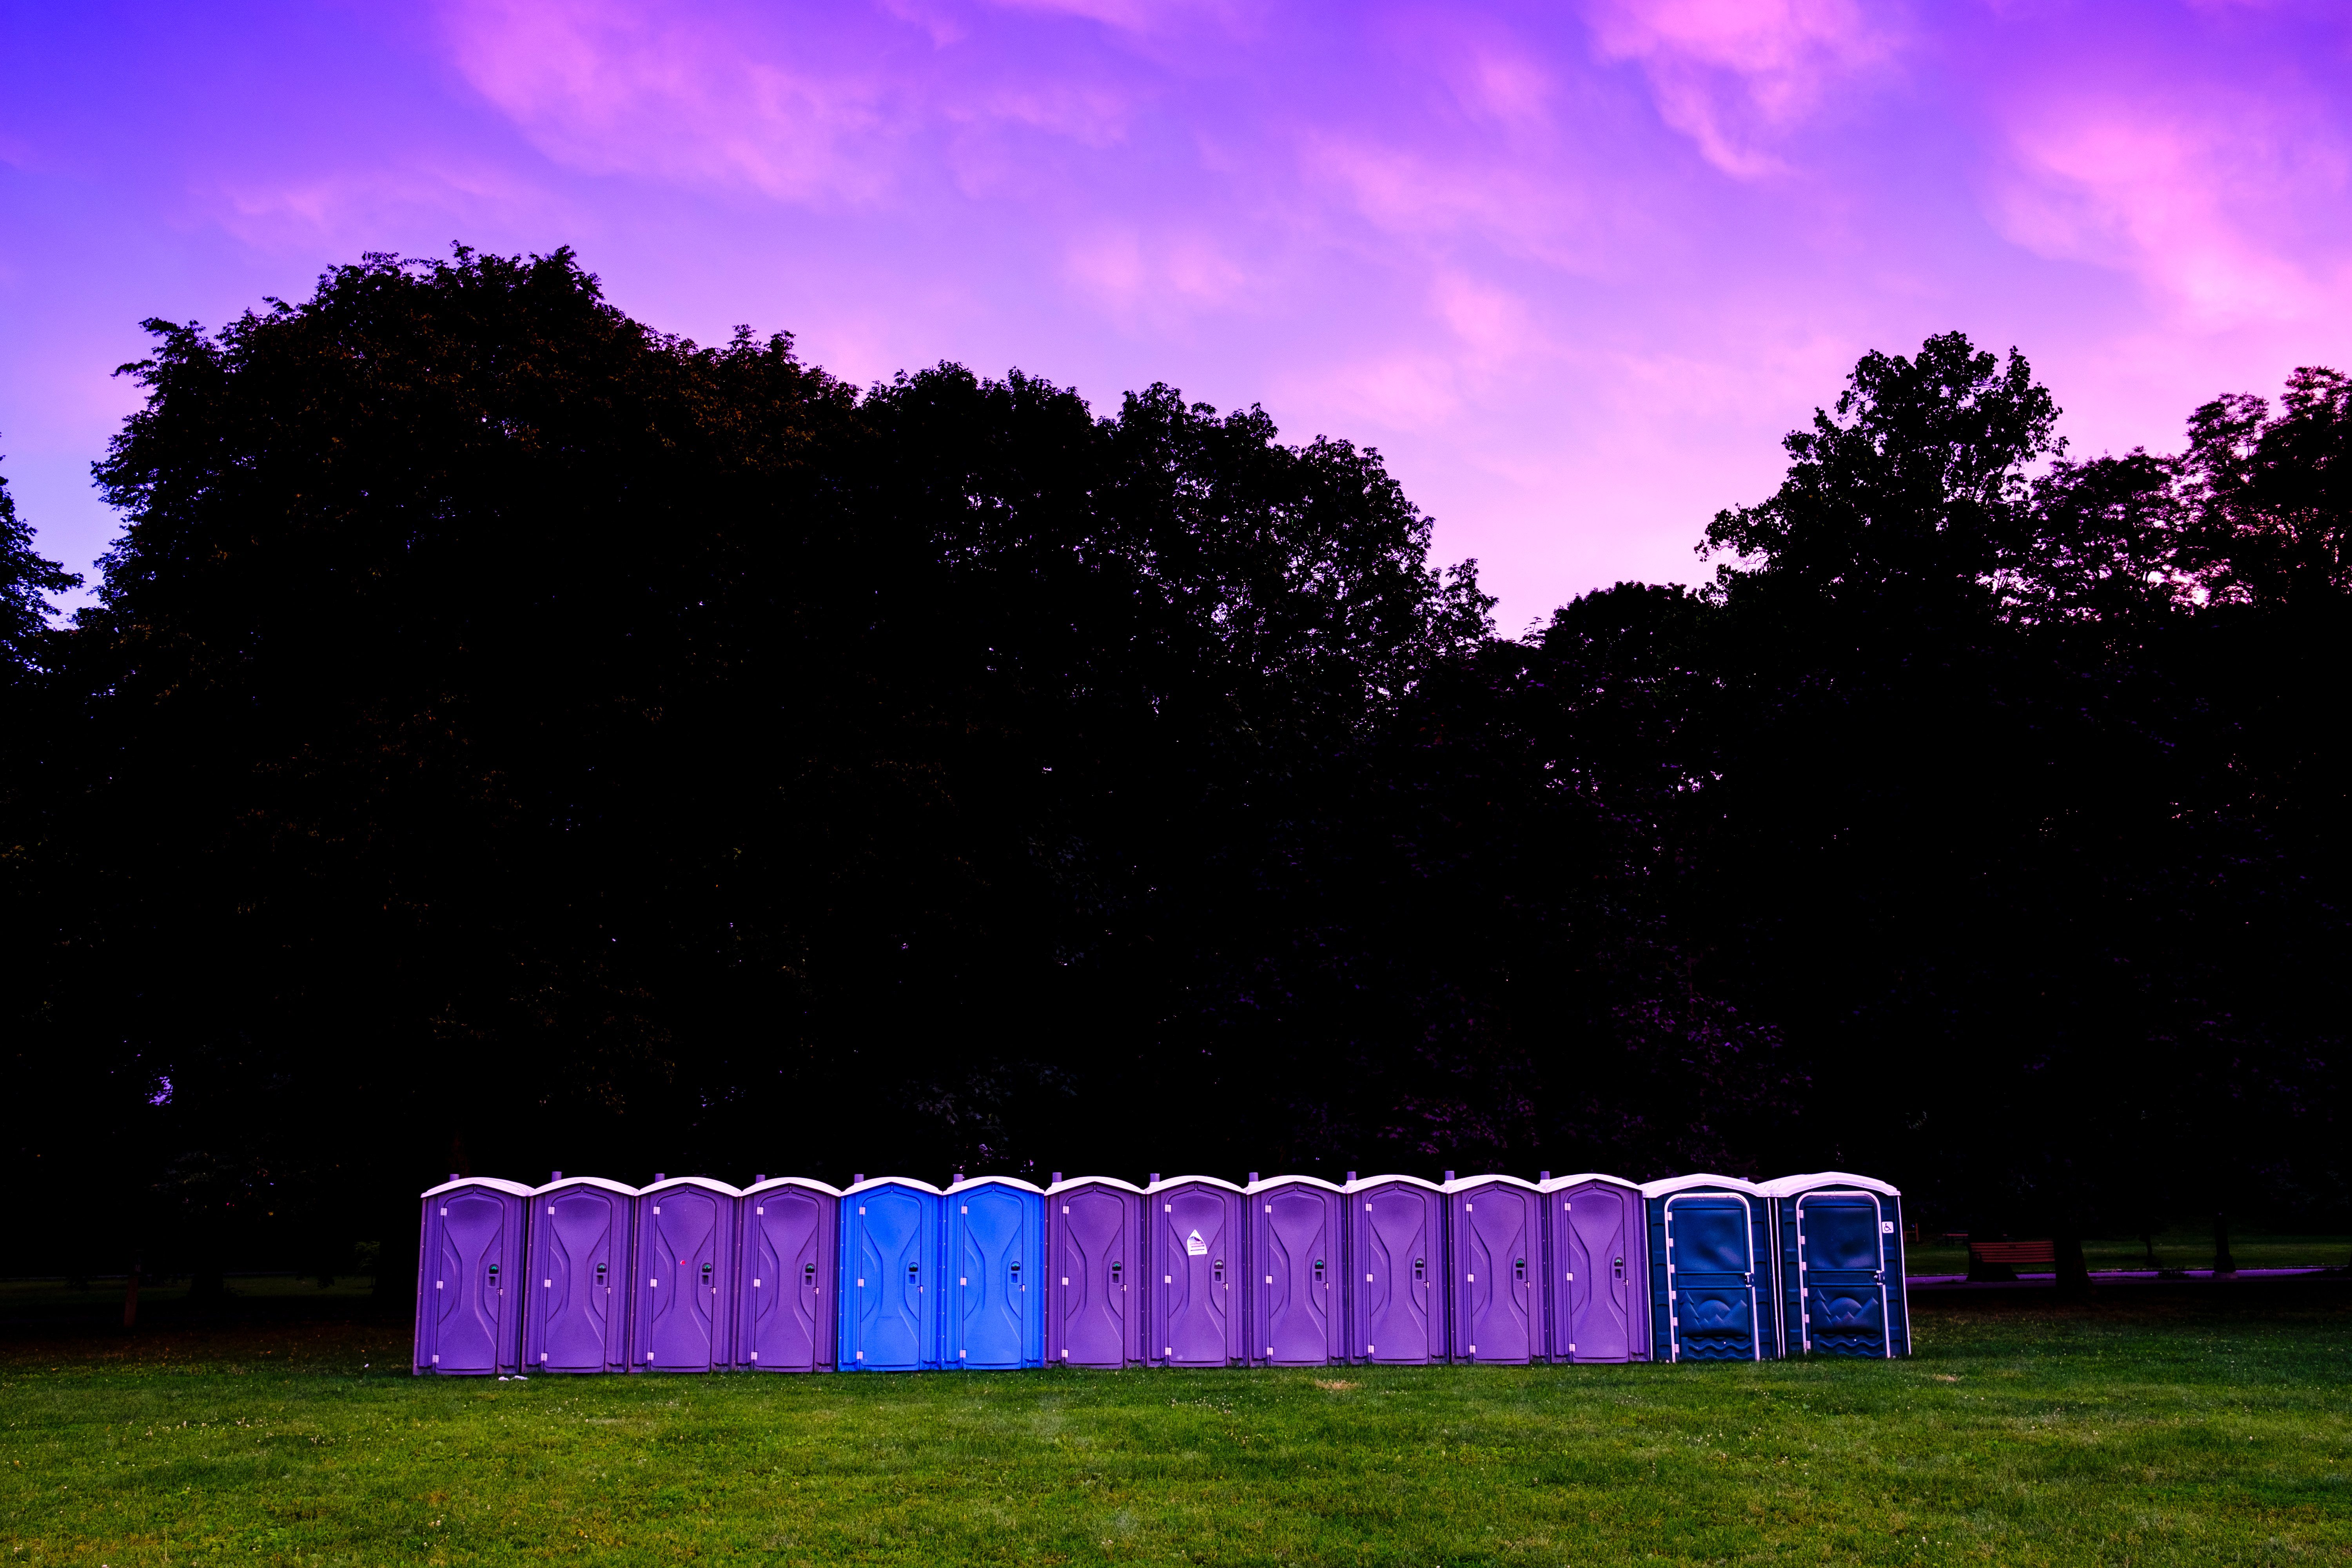 how to plan a music festival with portable toilets